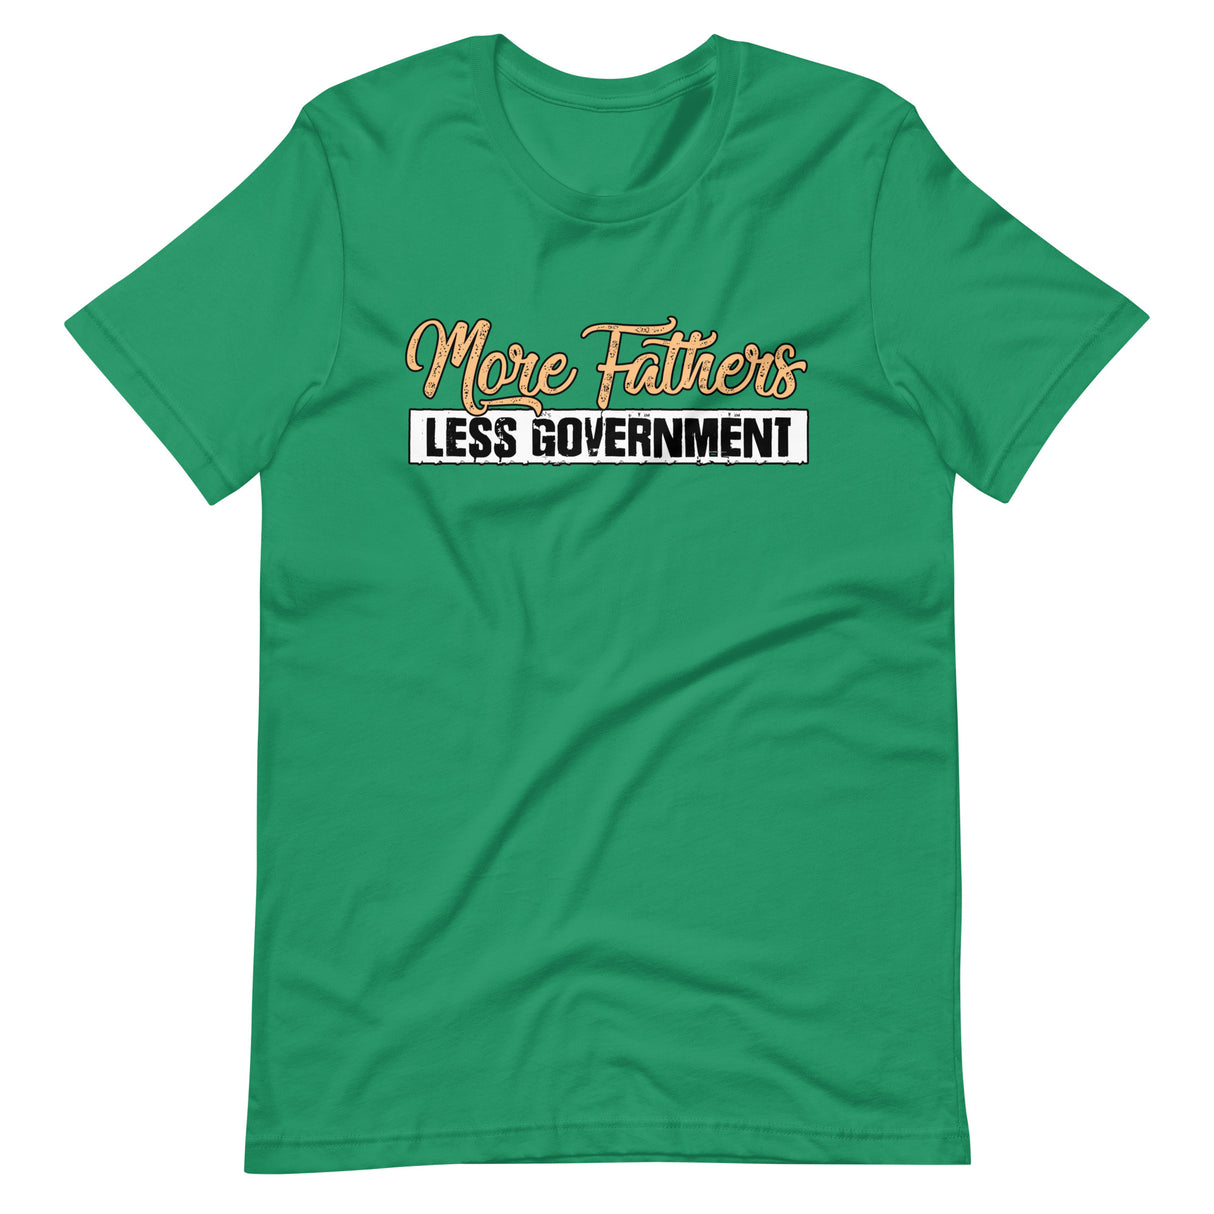 More Fathers Less Government Shirt - Libertarian Country